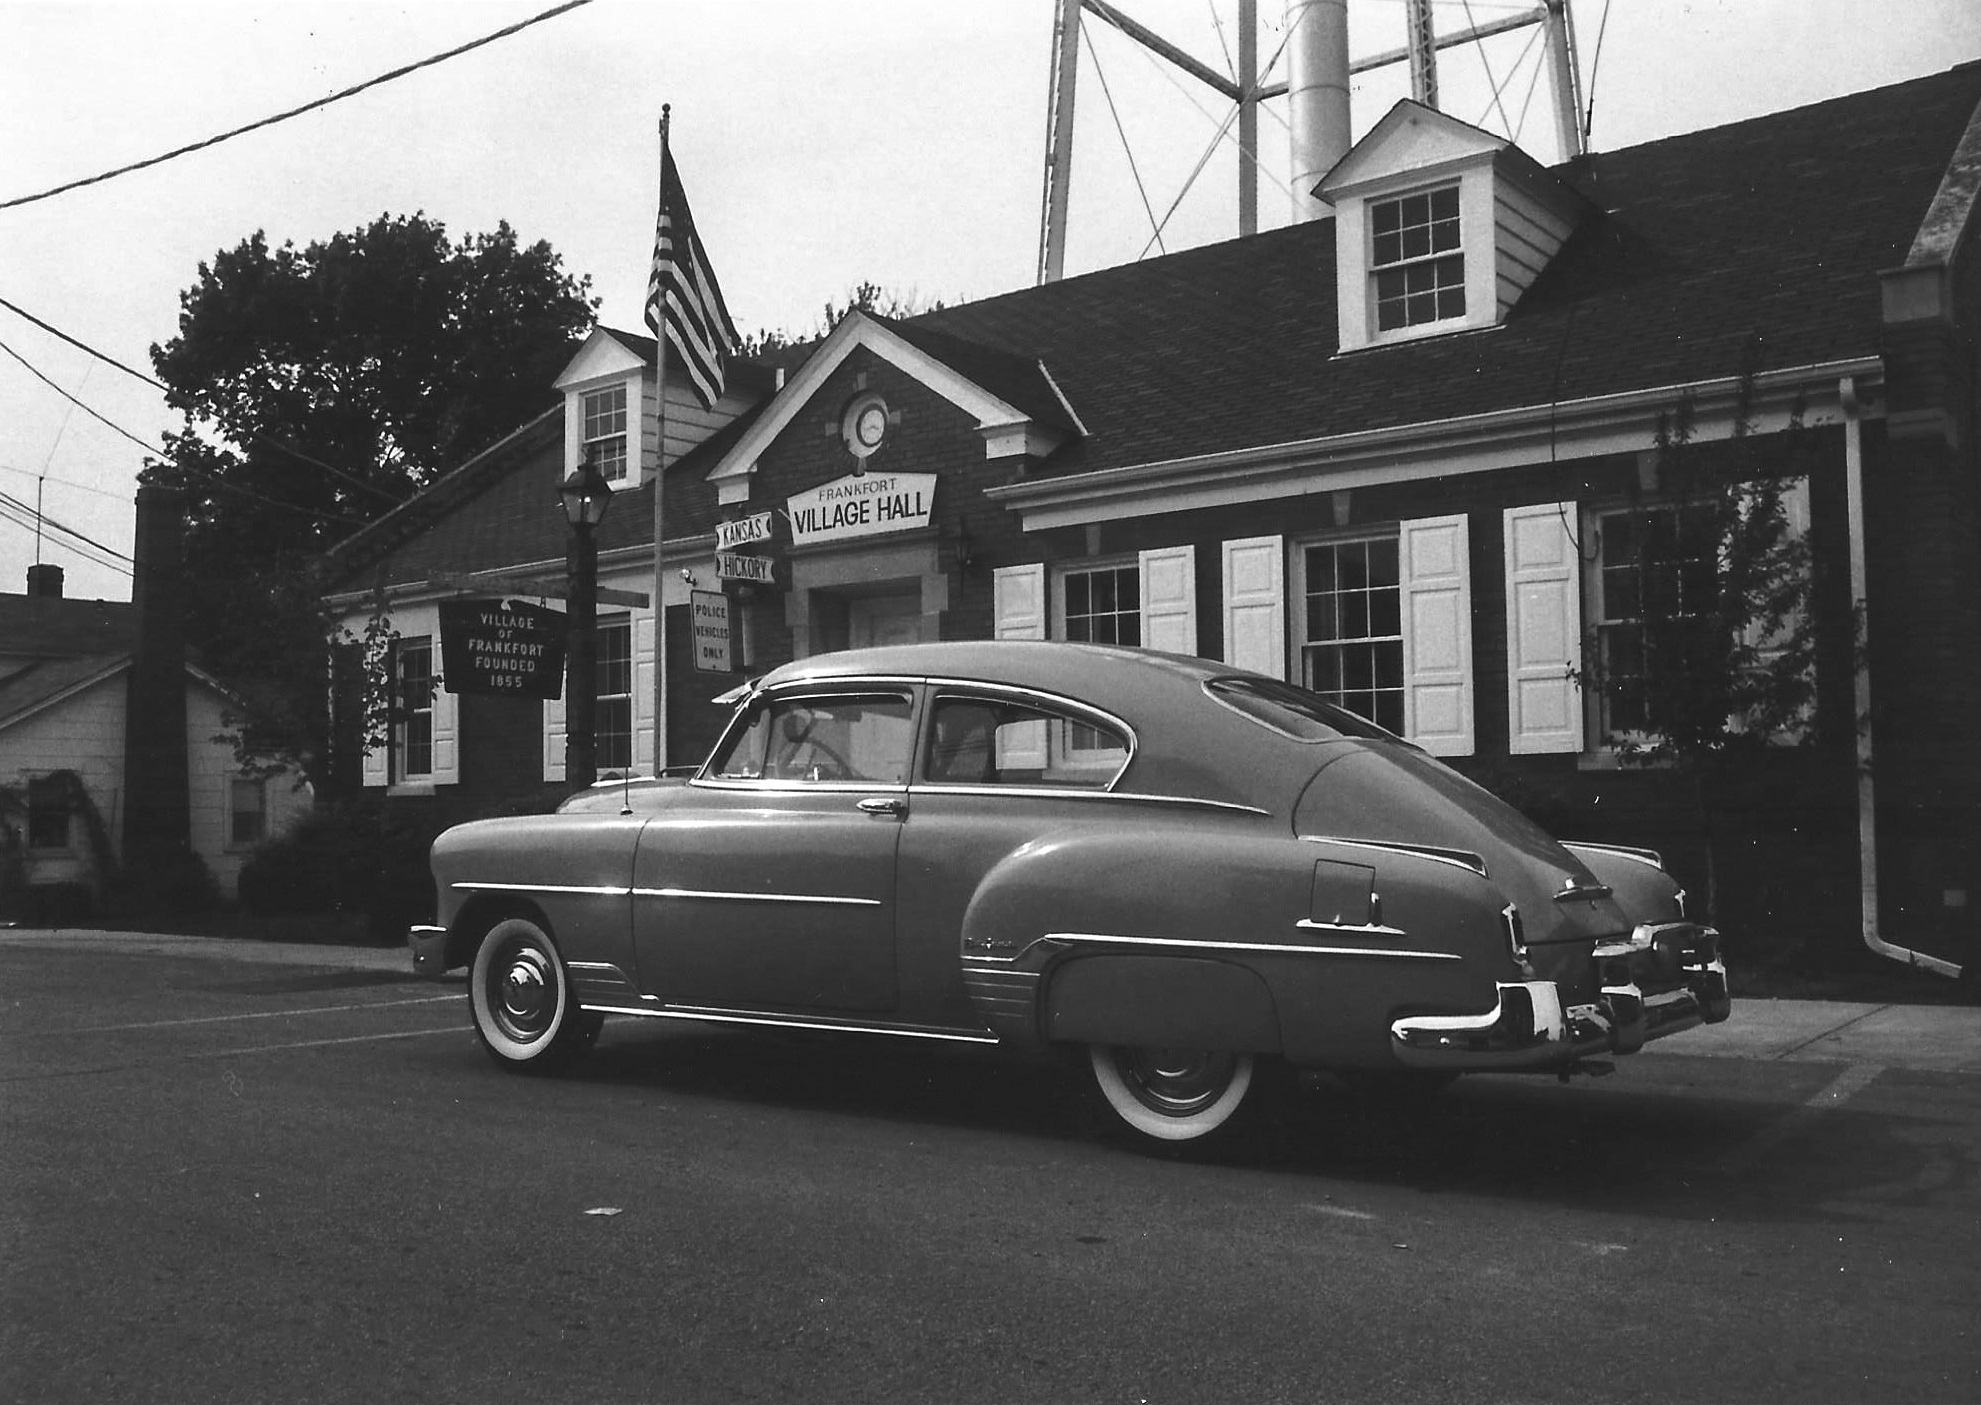 1952 Car in front of Village Hall